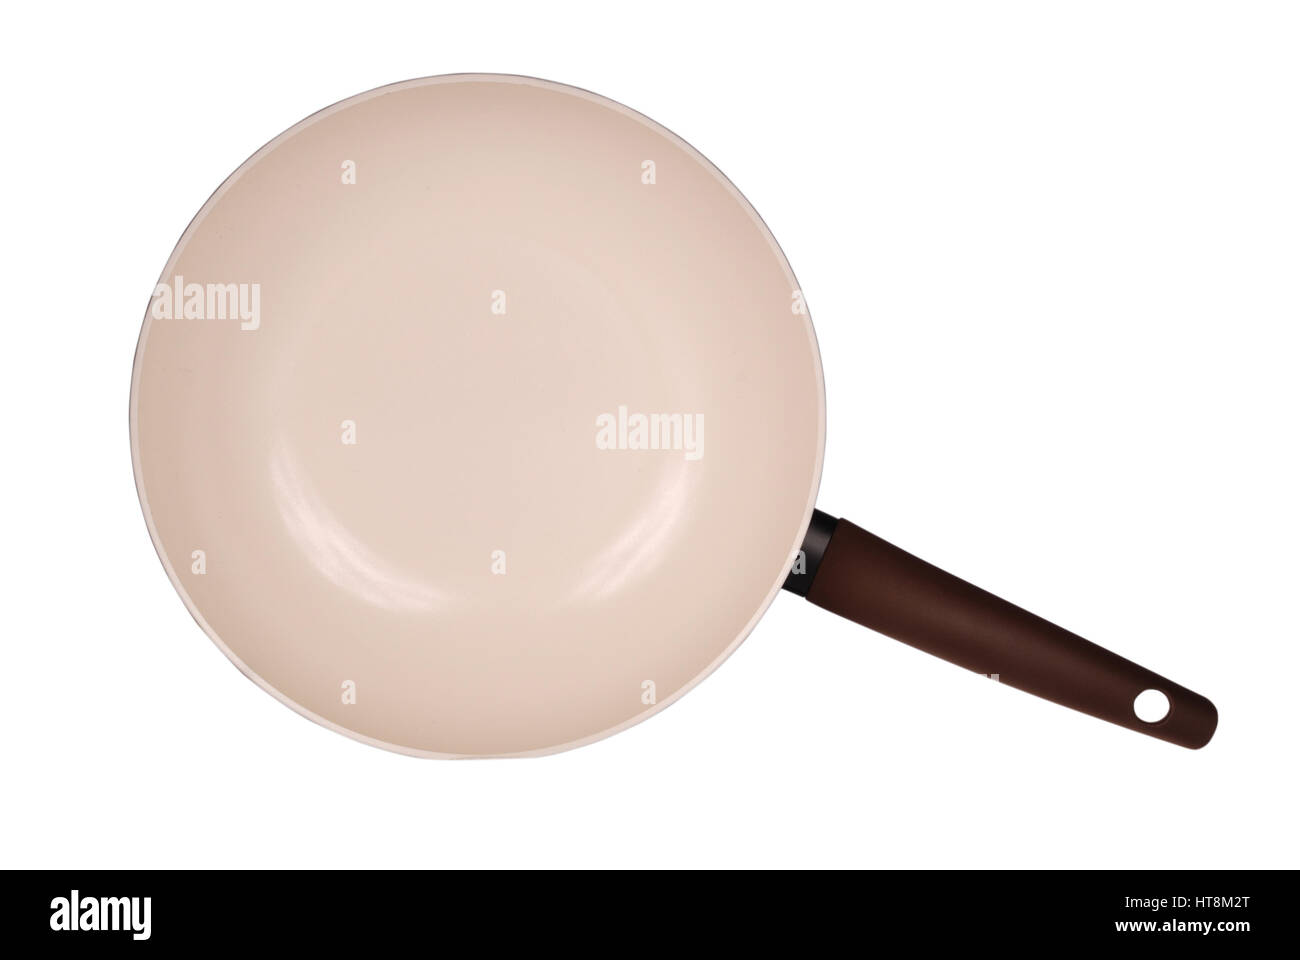 https://c8.alamy.com/comp/HT8M2T/photo-of-brown-ceramic-frying-pan-isolated-on-white-background-with-HT8M2T.jpg